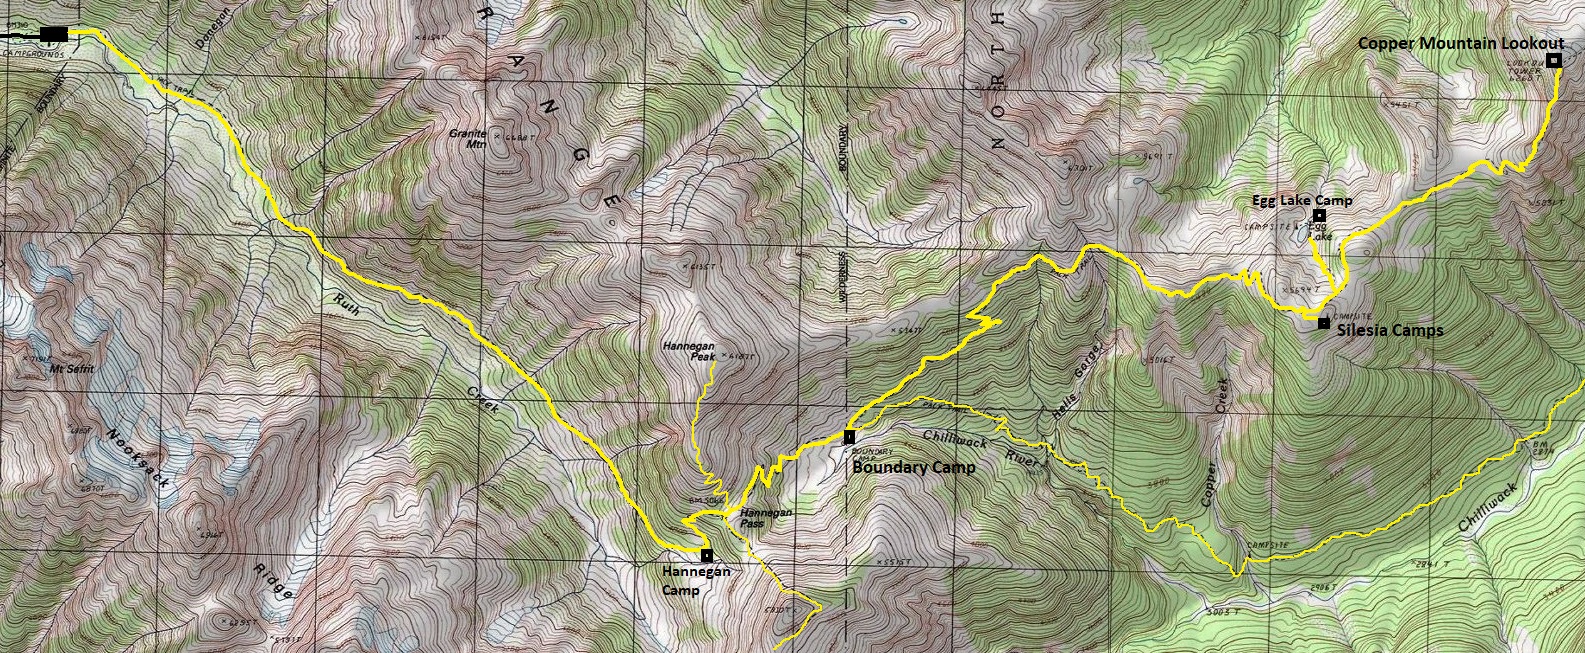 copper mountain lookout map